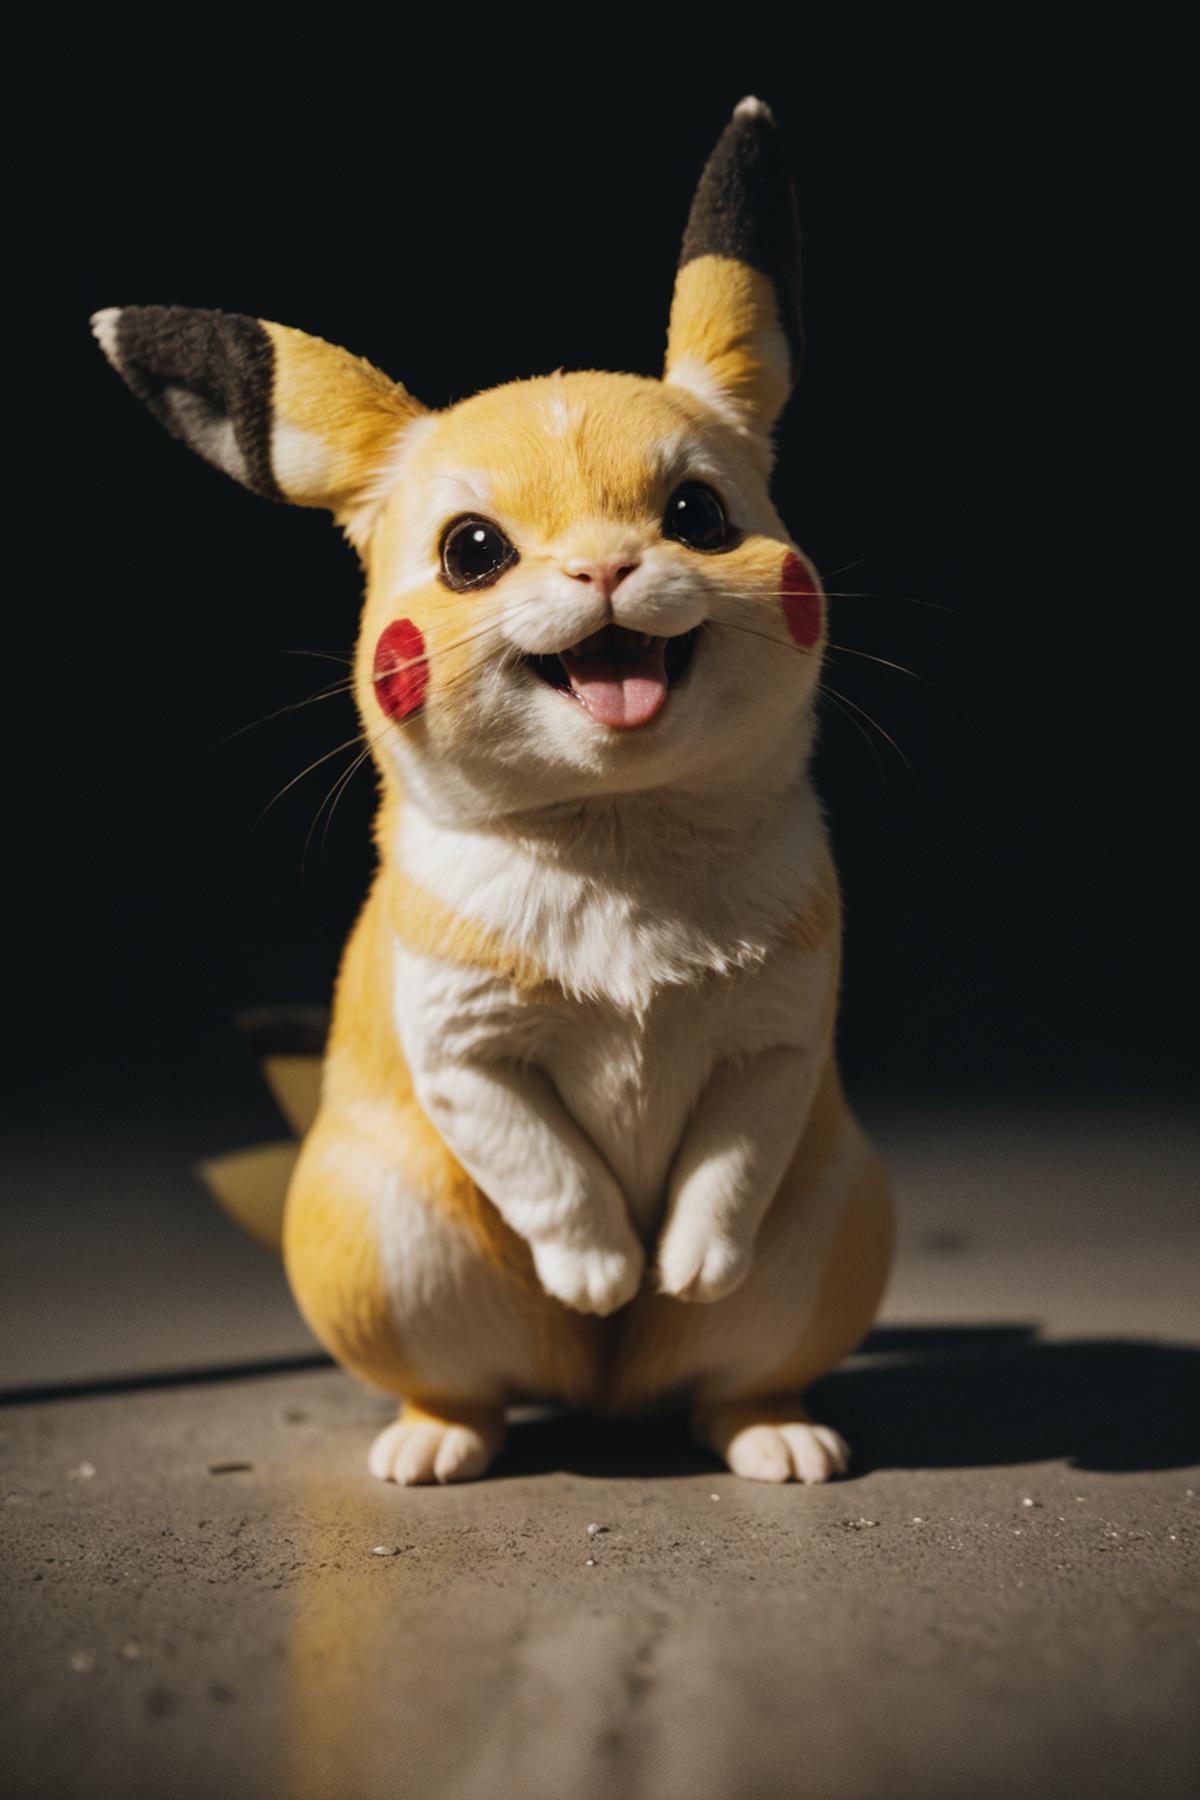 A small stuffed Pikachu toy with a smile on its face.